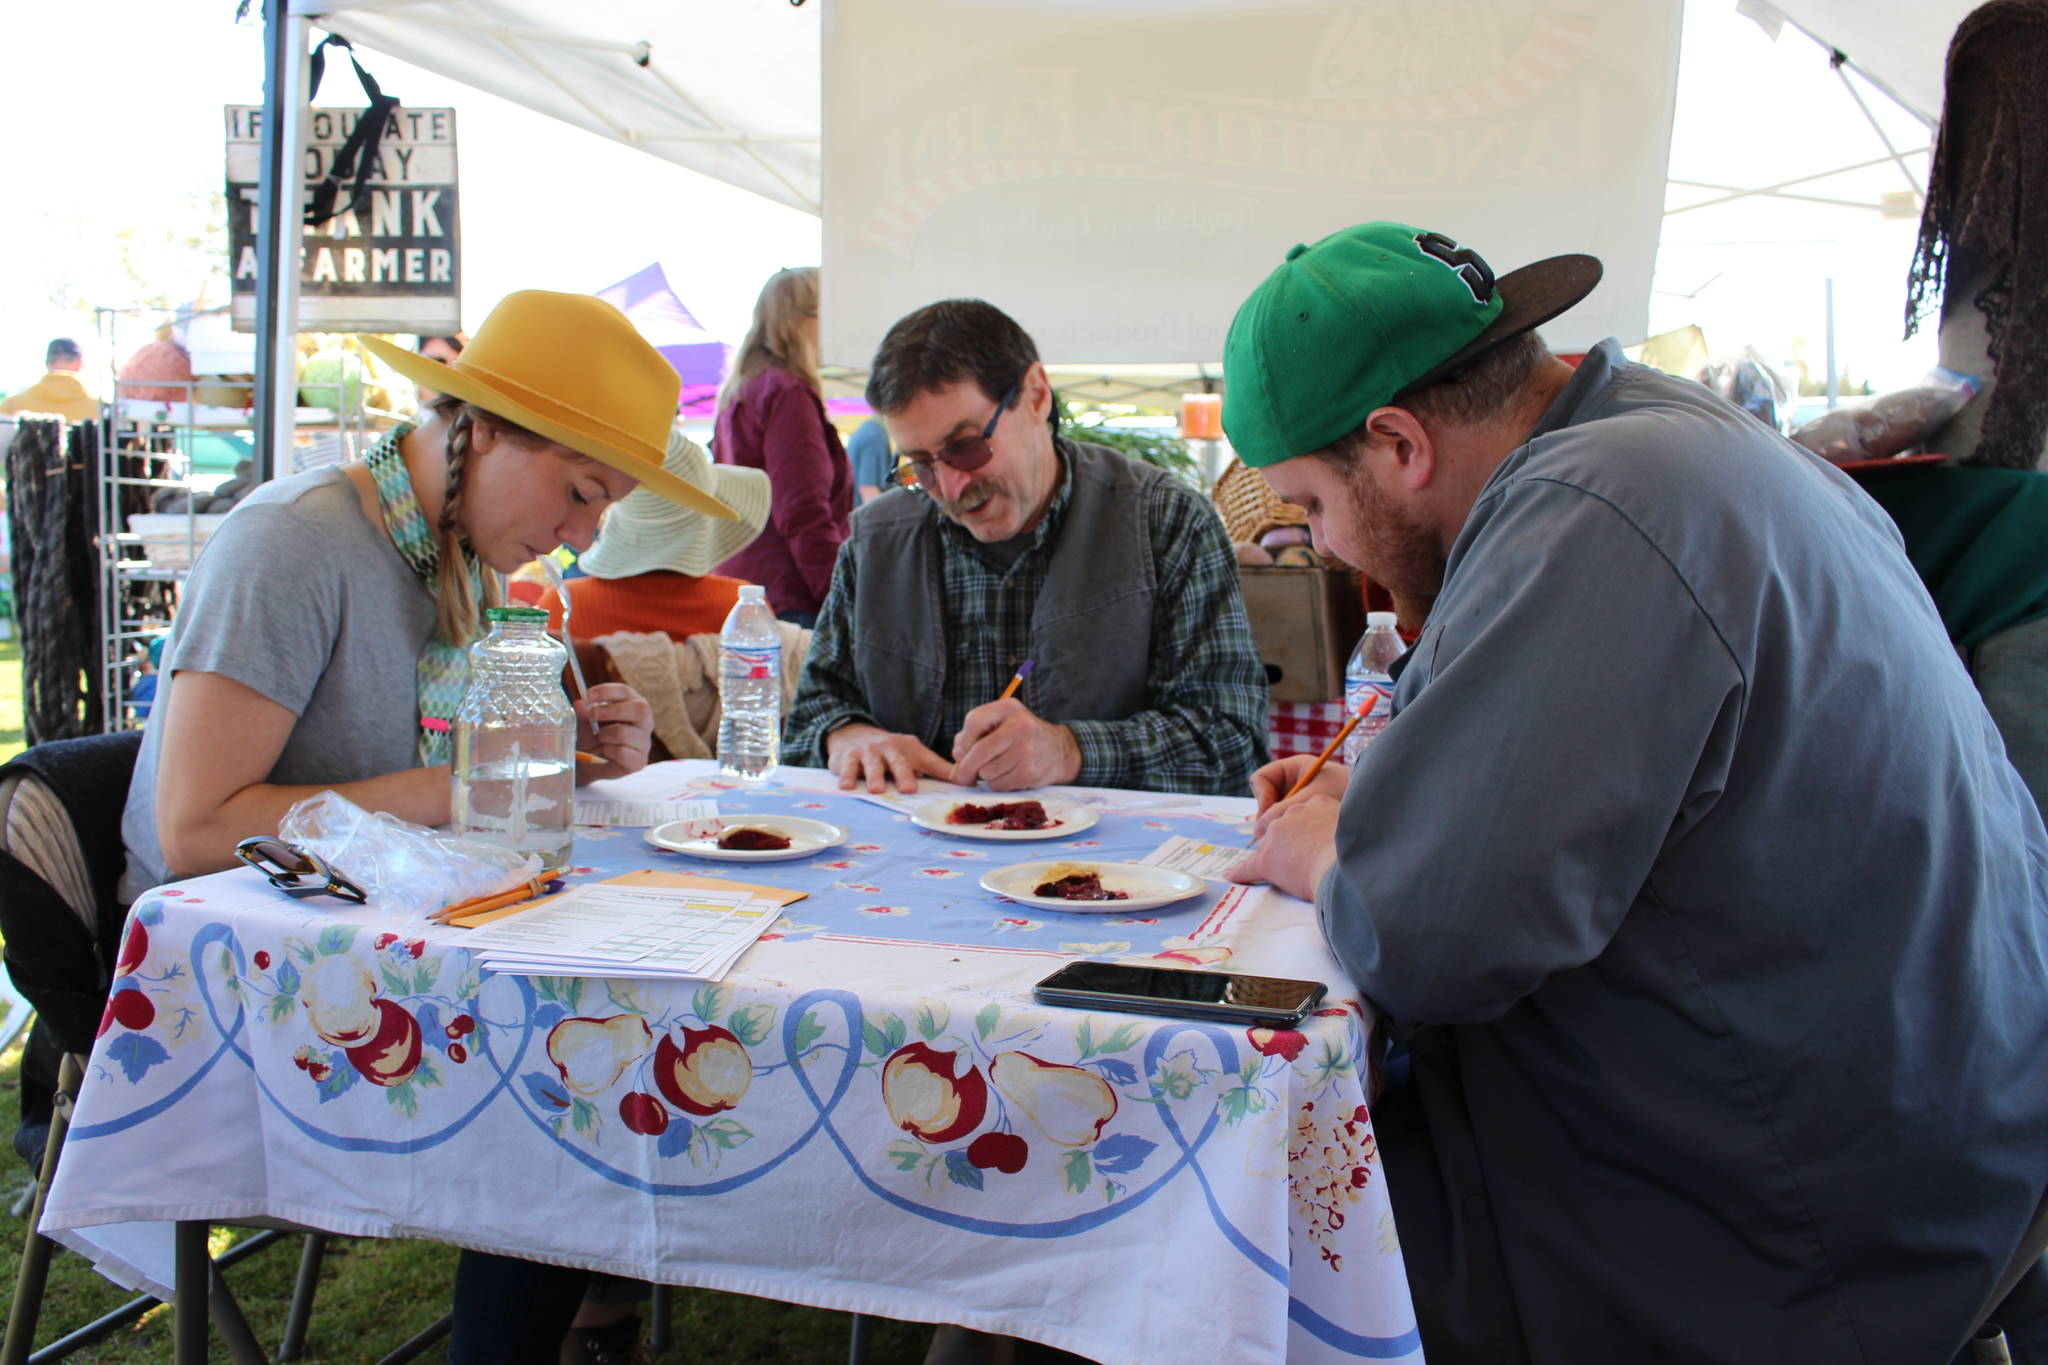 From left, pie contest judges Kelsey Shields, Larry Marsh and Joe Spady deliberate on the best pies at the Harvest Moon Local Food Festival at Soldotna Creek Park on Sept. 14, 2019. (Photo by Brian Mazurek/Peninsula Clarion)